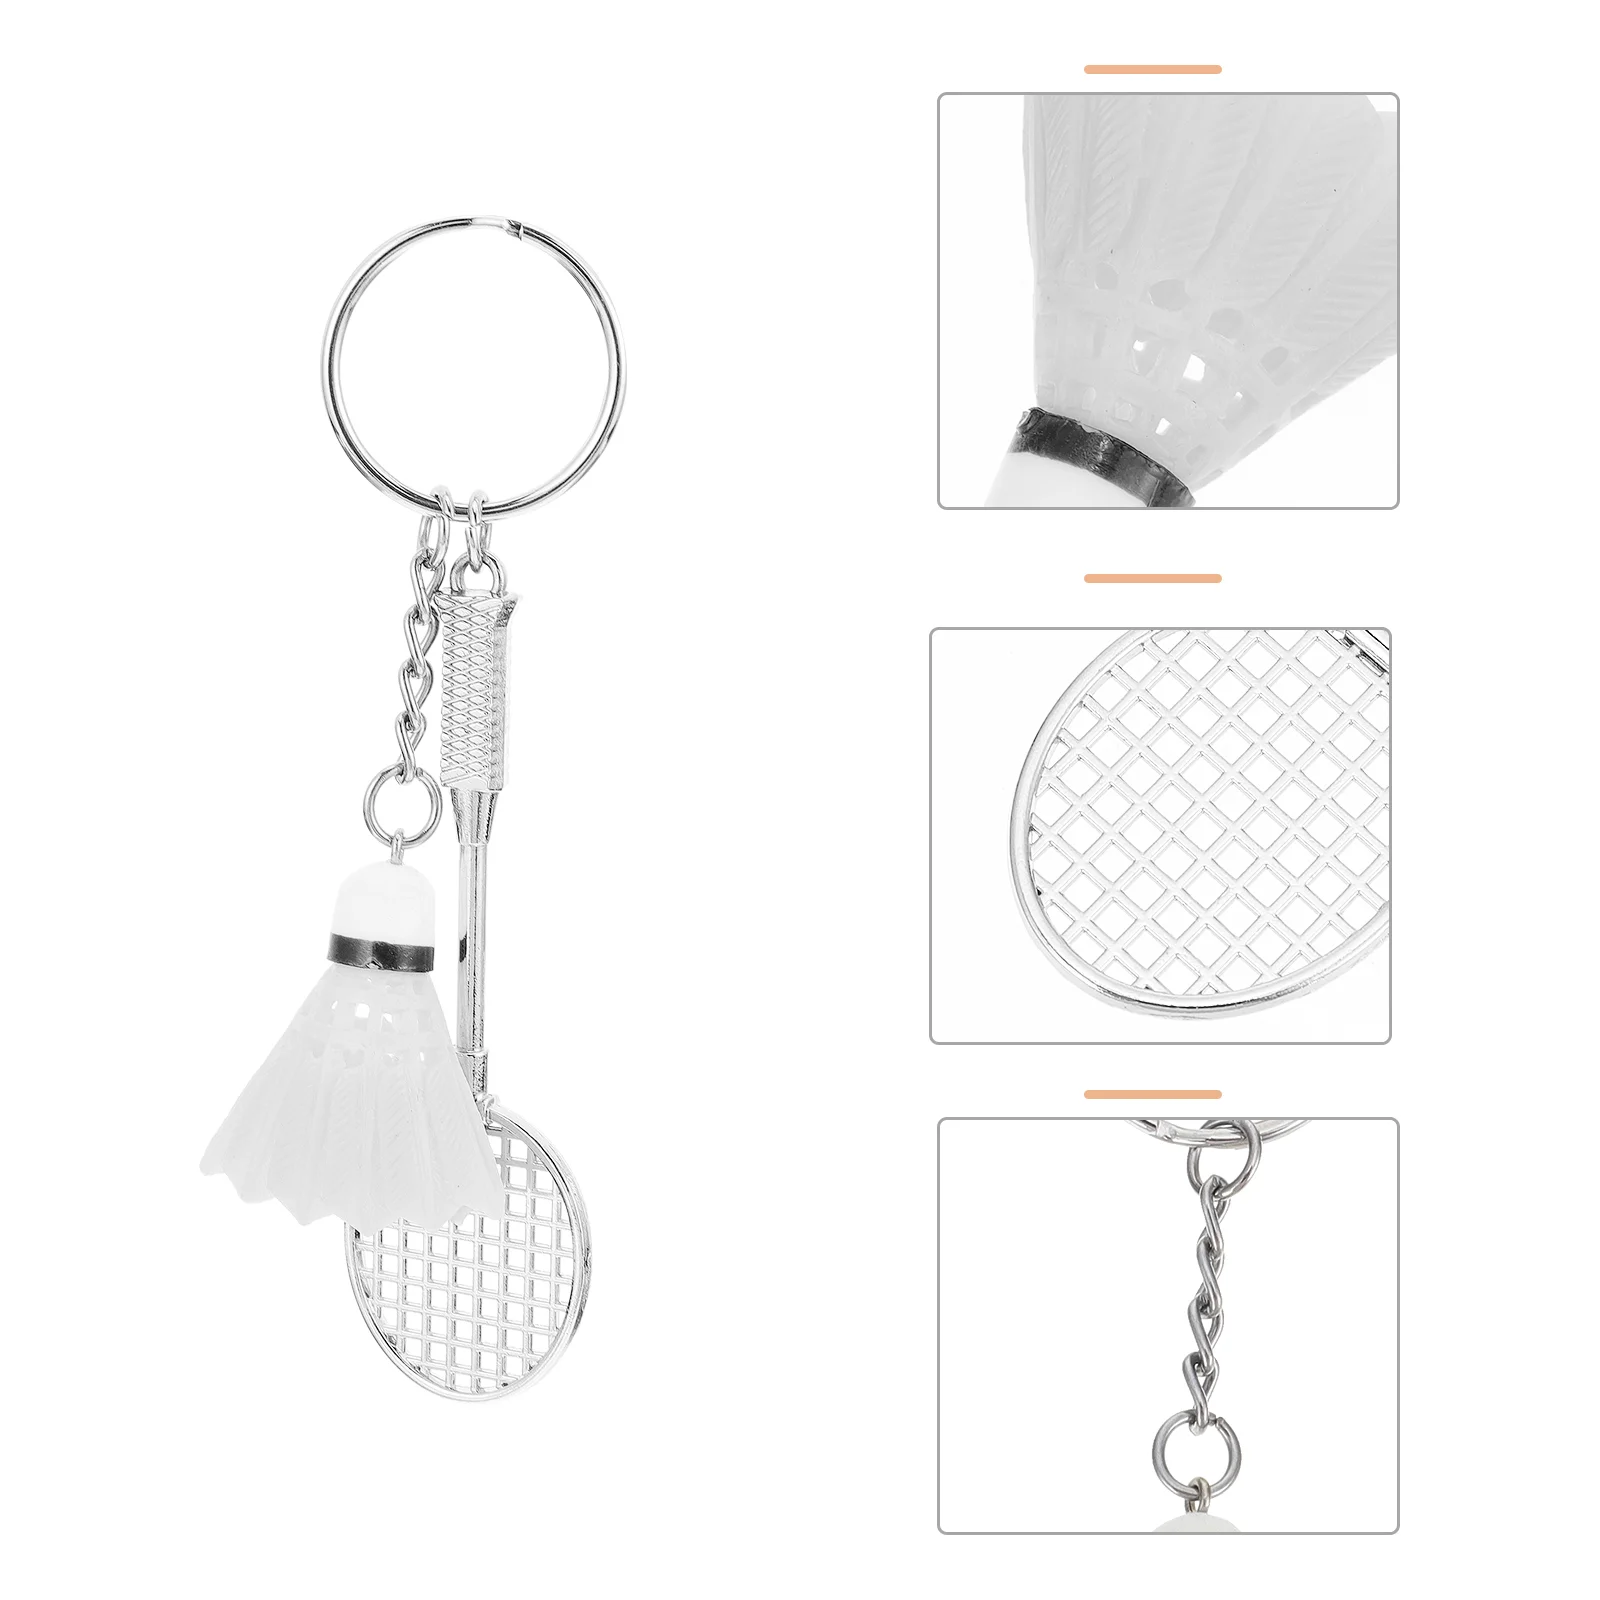 2pcs Badminton Keychain and Racket Keychain Funny Key Ring Sports Souvenirs Gift for Themed Party Favor small bags and box for business jewellry earrings ring necklace packaging organizer party wedding christmas favor gift pouch